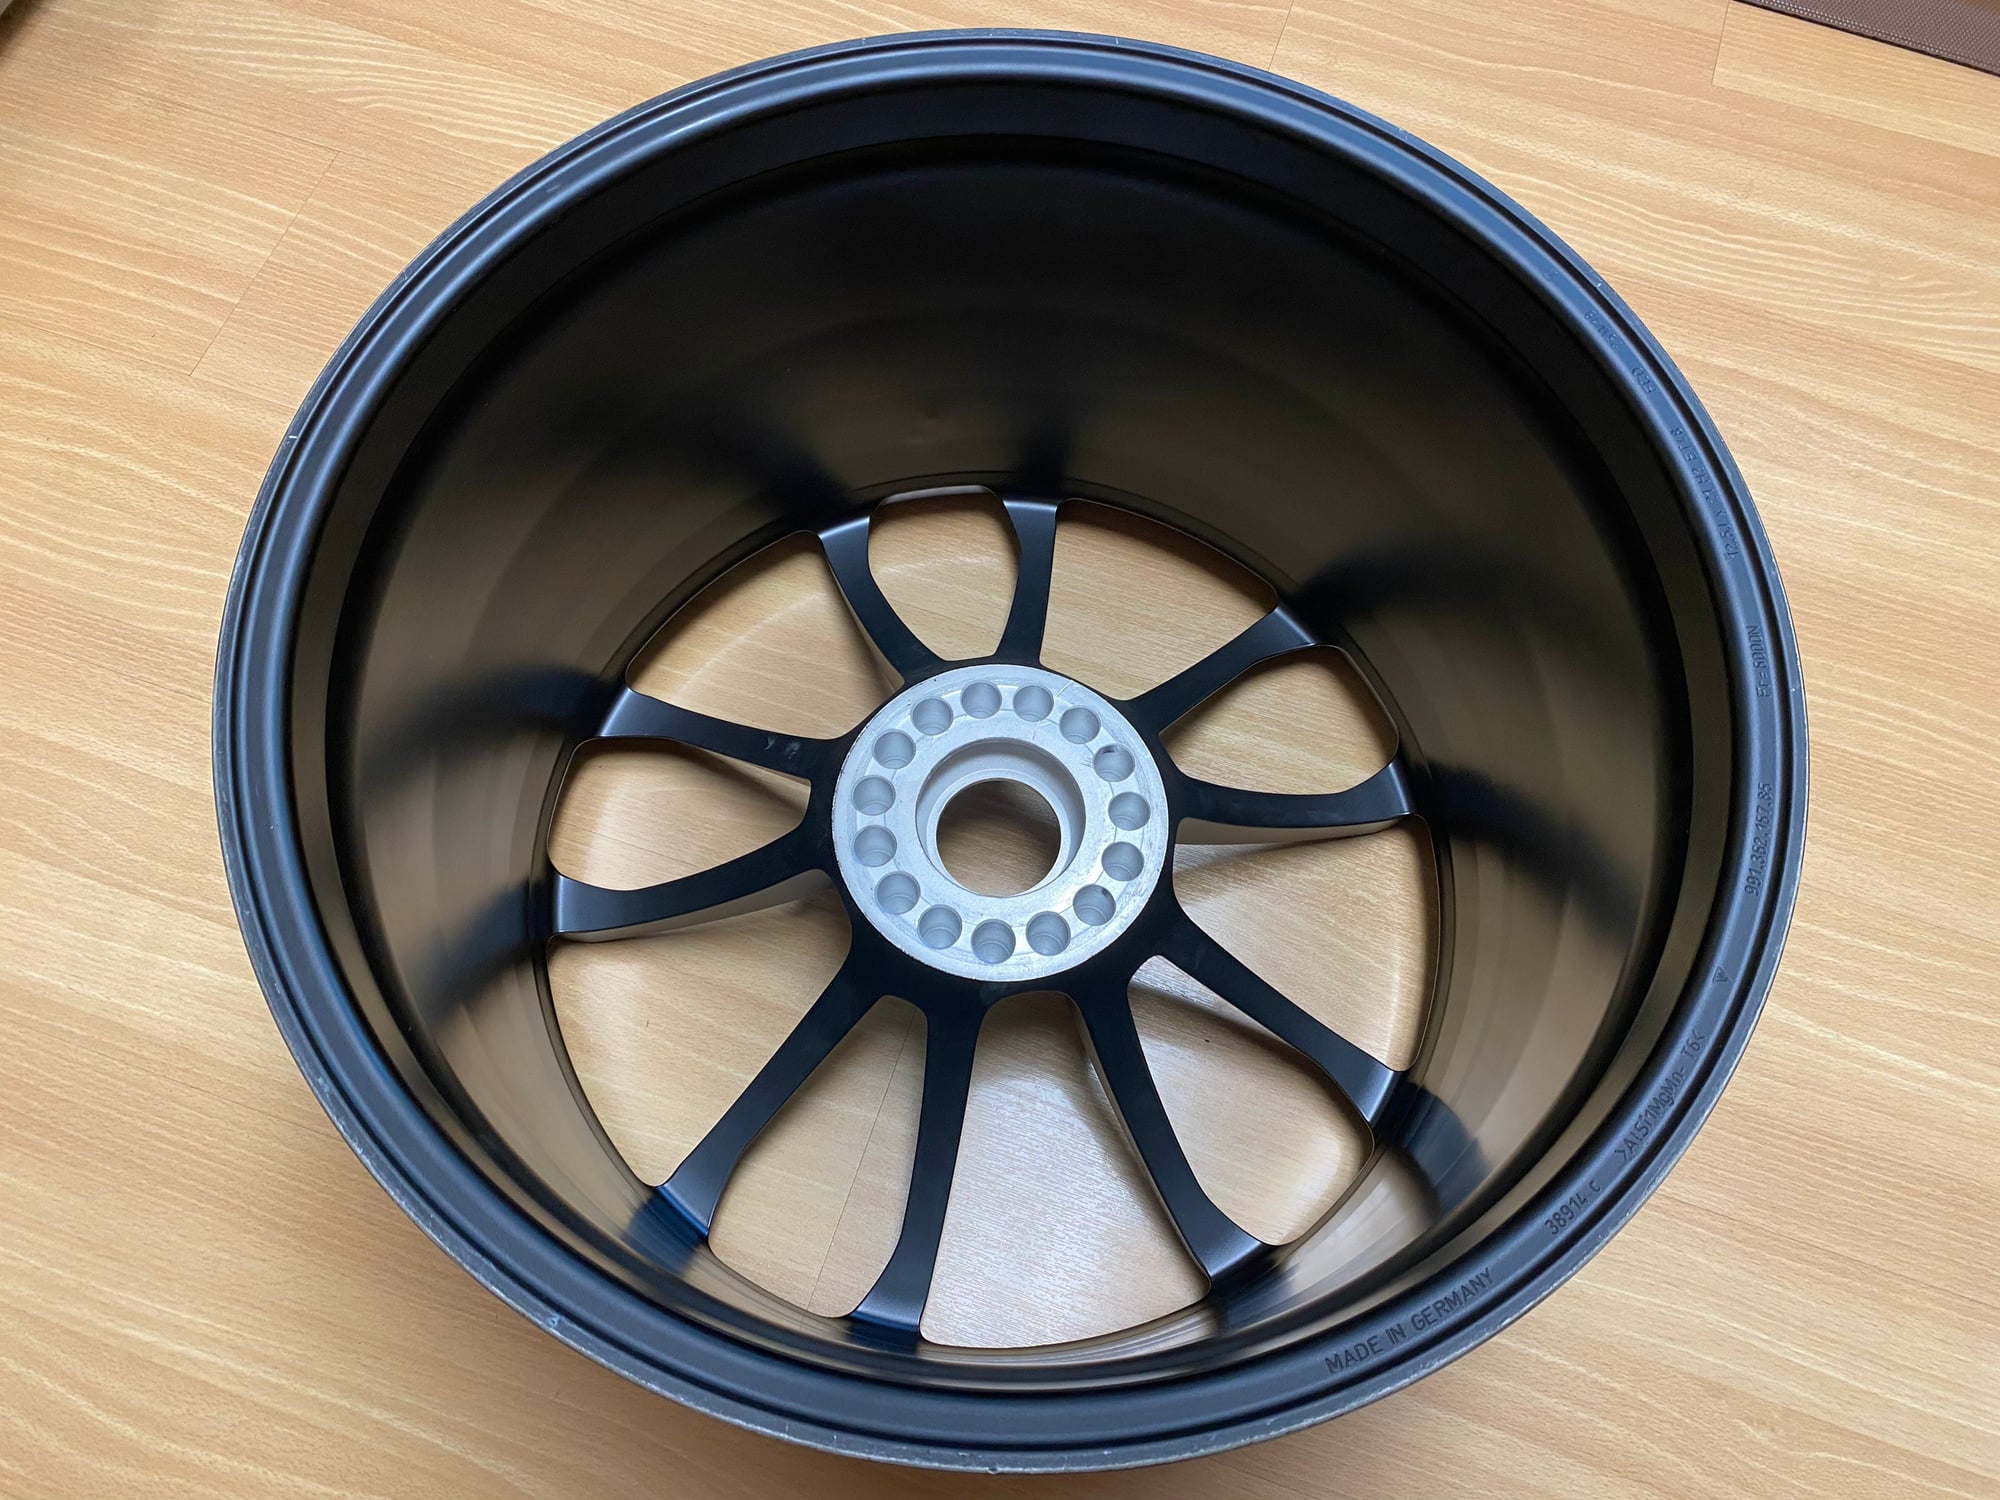 Wheels and Tires/Axles - Rear wheel for 991 GT3 RS - Used - 2016 to 2019 Porsche 911 - South San Francisco, CA 94080, United States